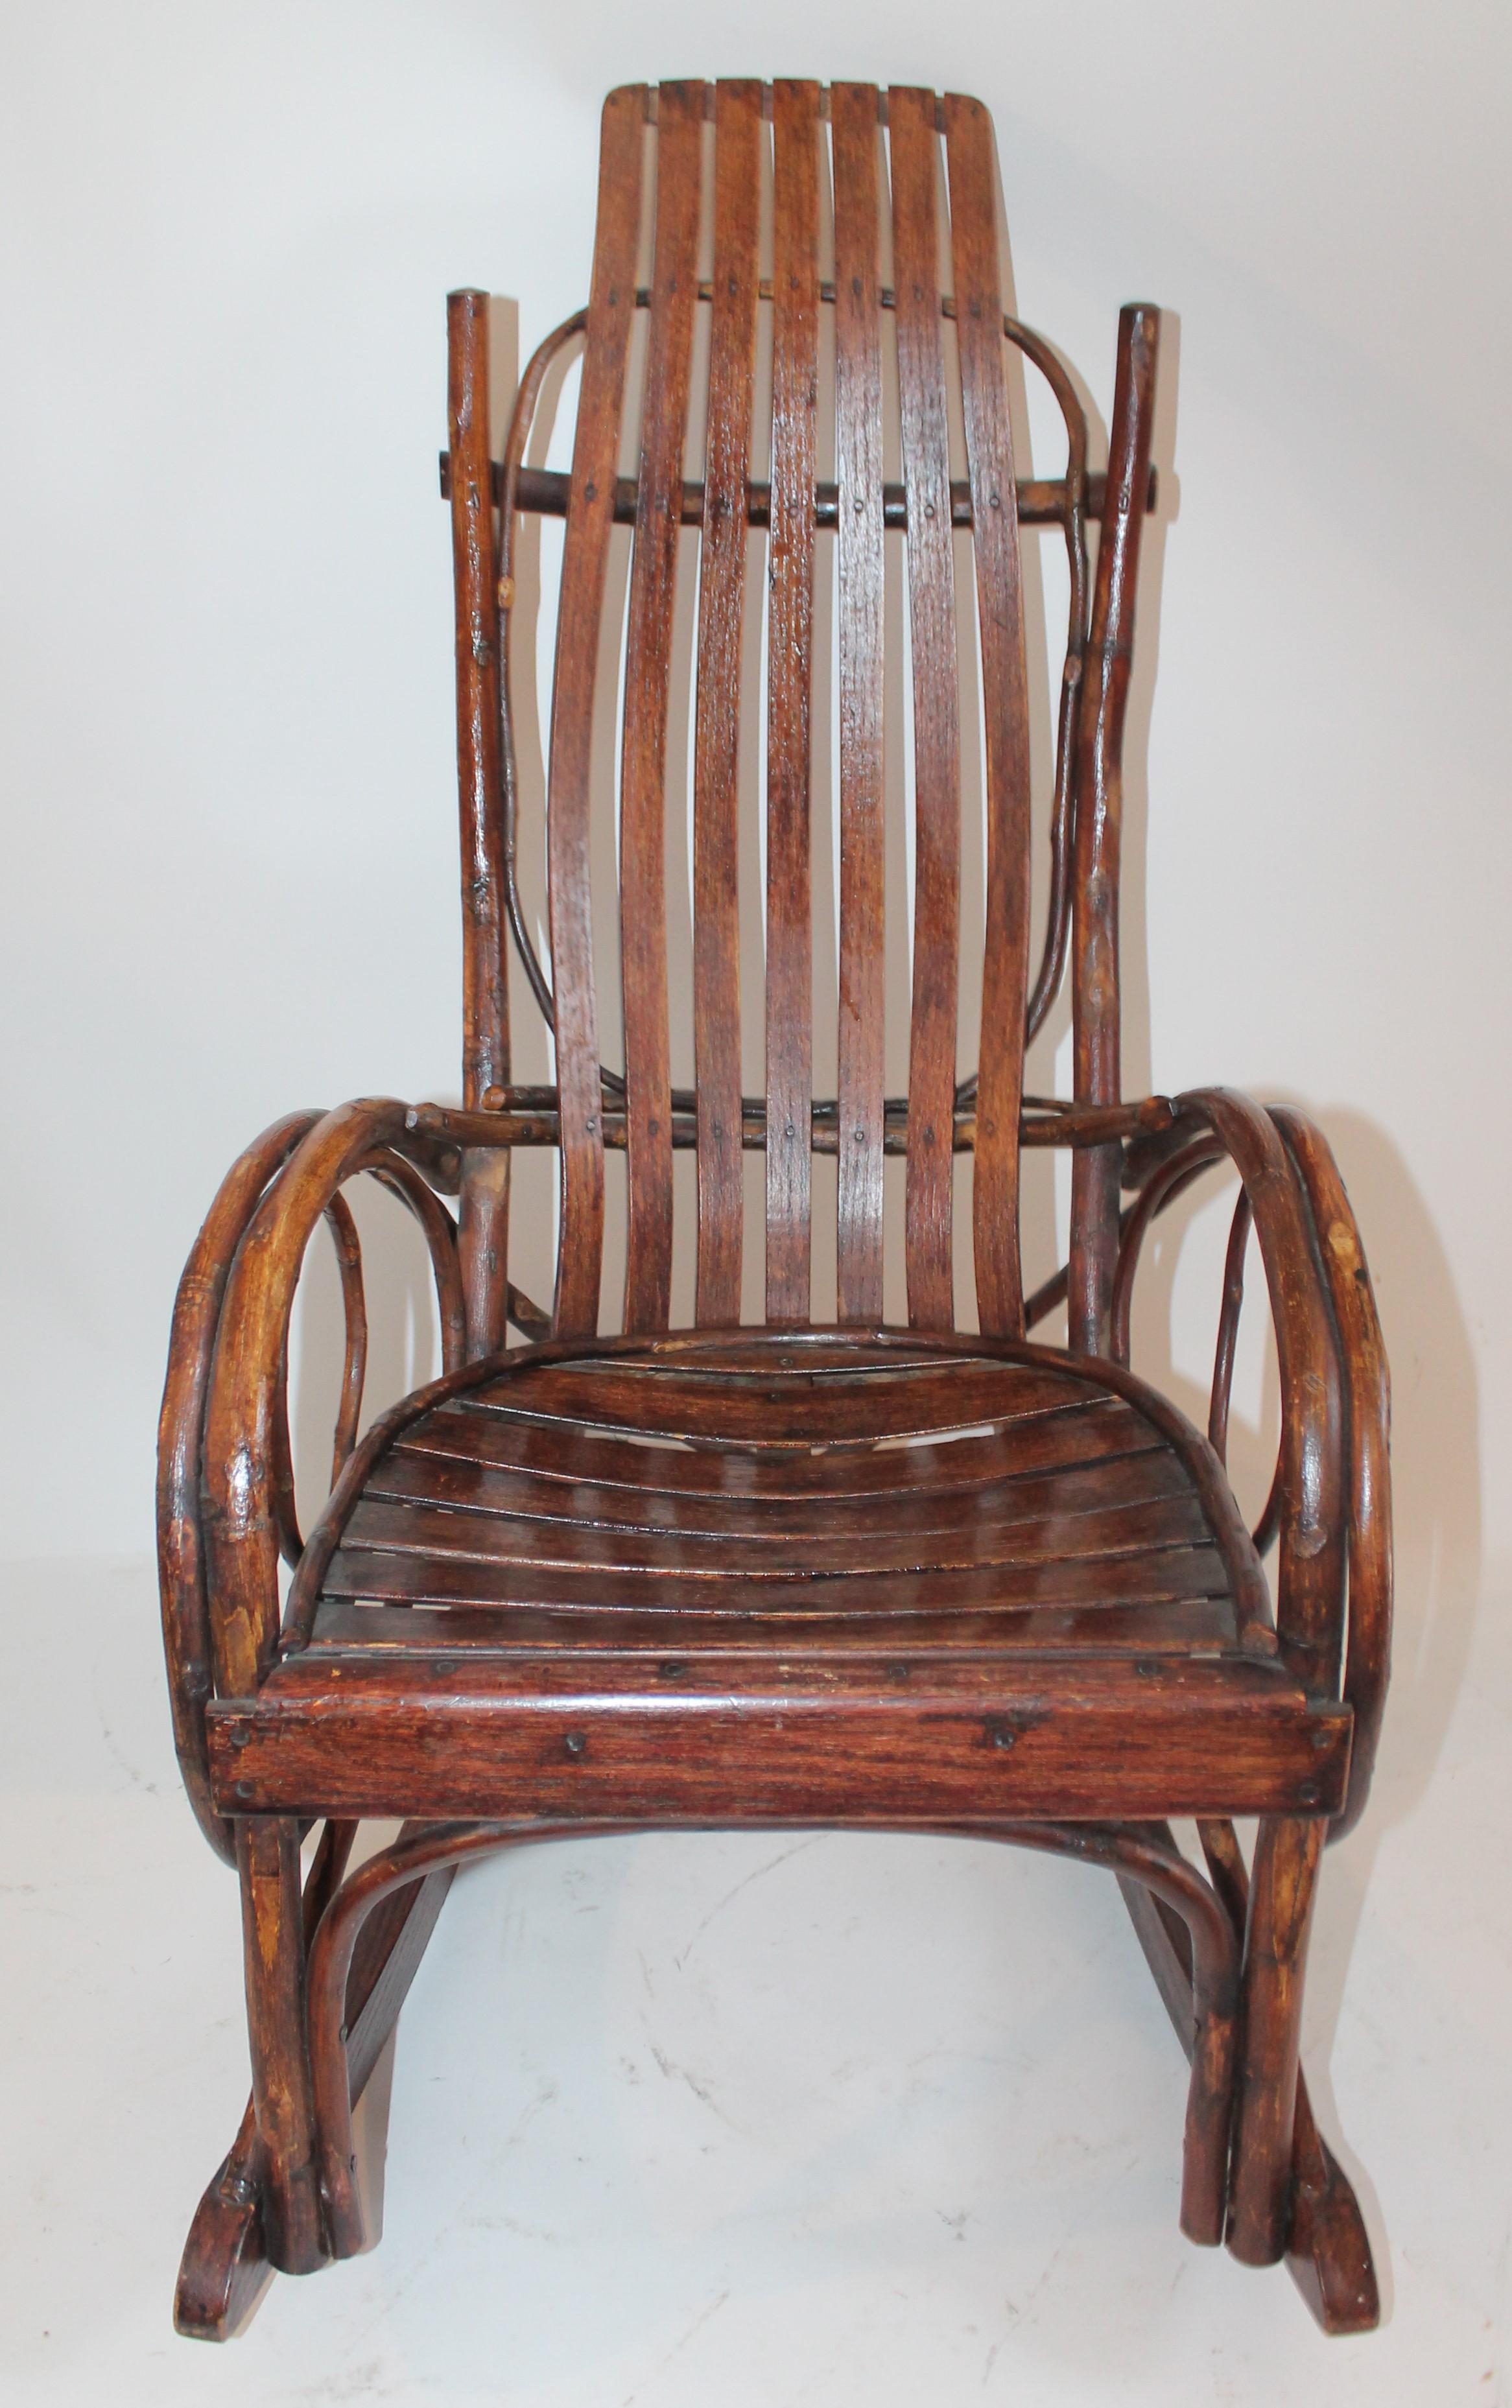 This vintage Amish child's rocking chair is in fine condition and was found in Lancaster County, Pennsylvania. The chair is in fine working order as well. This rocking chair has a very fine patina.